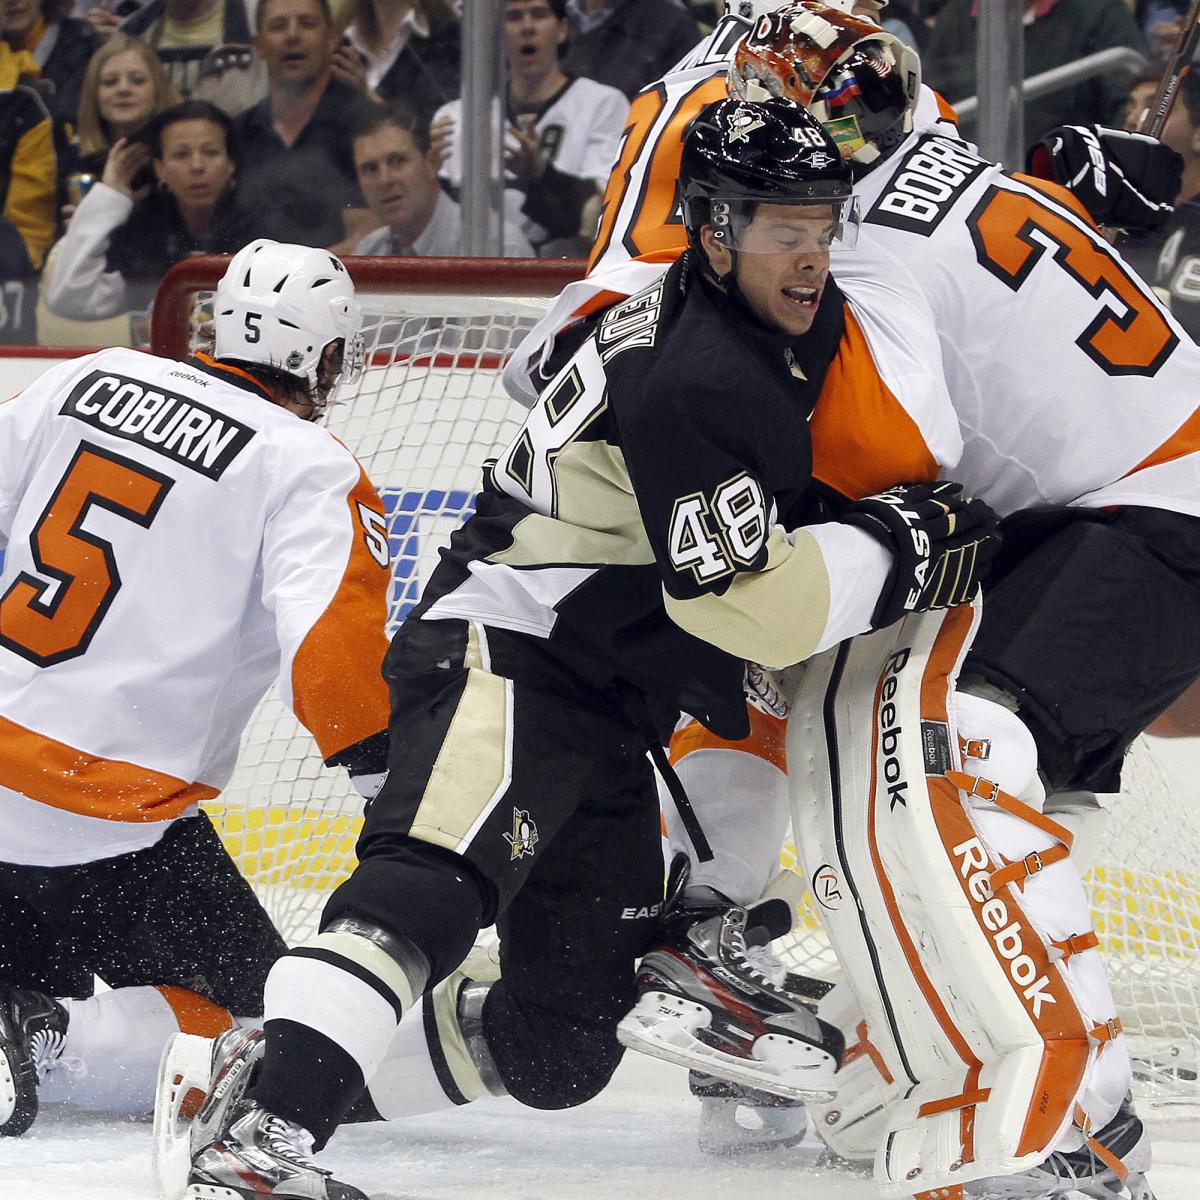 NHL Playoff Schedule 2012: 5 Most Exciting Matchups of First Round